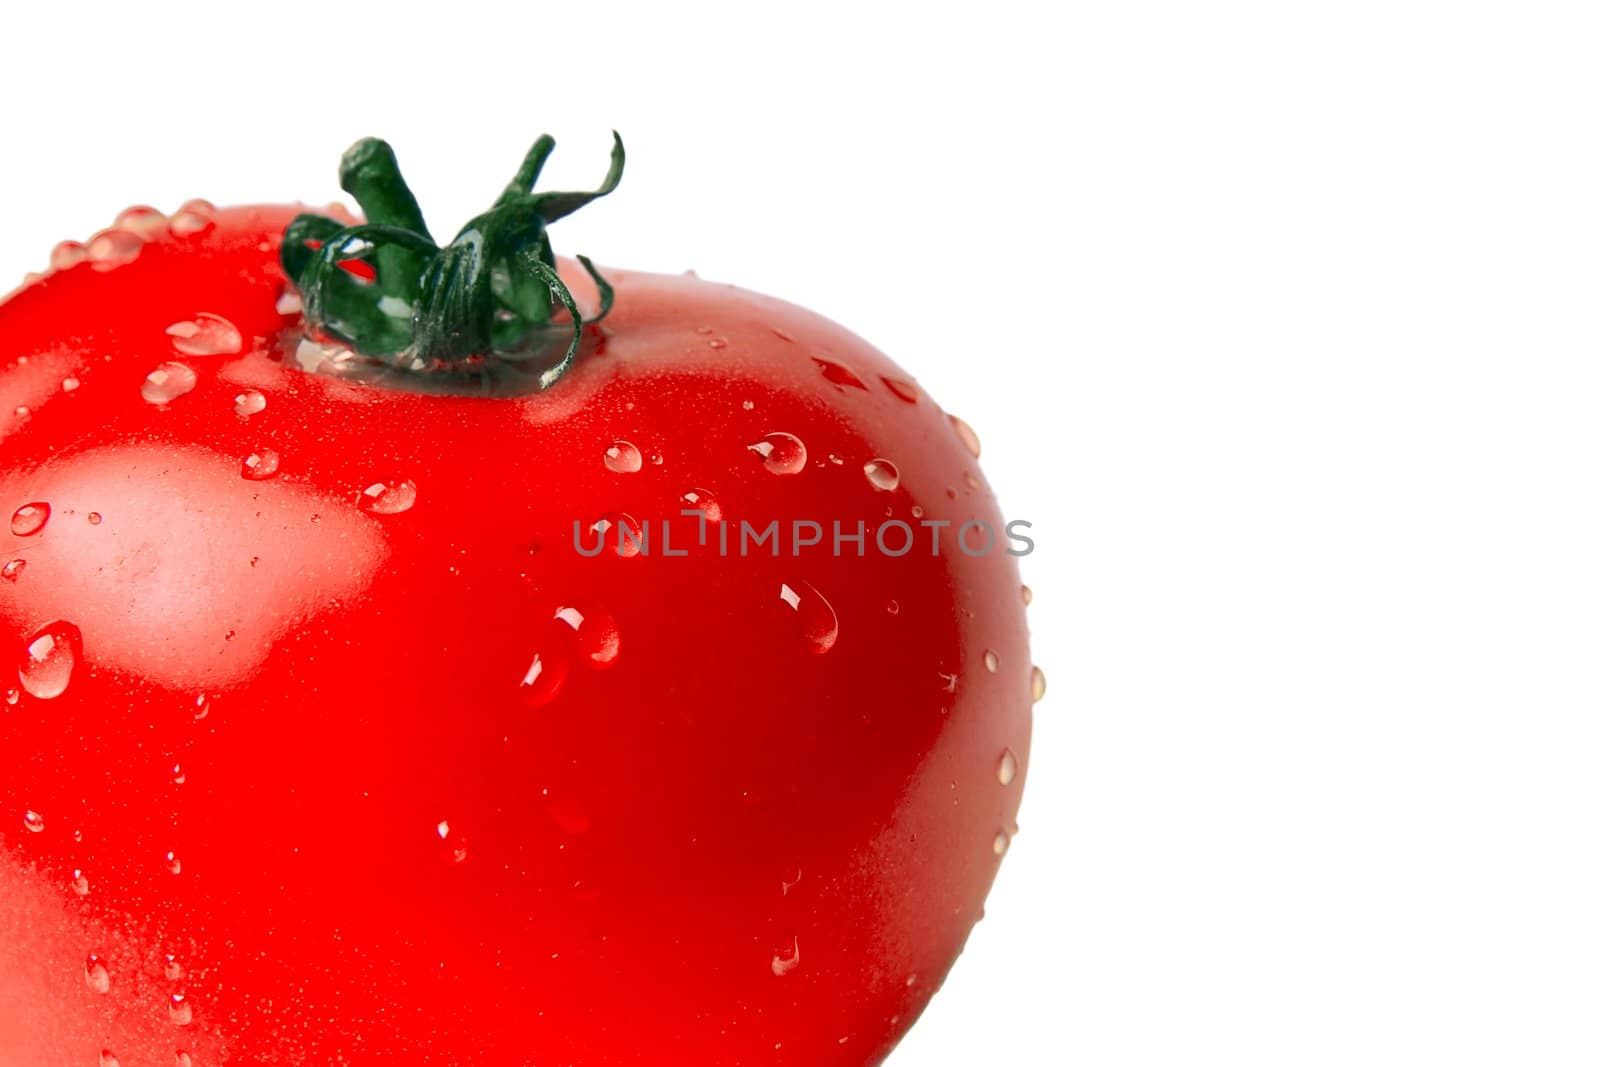 wet tomato at the plate on a white background